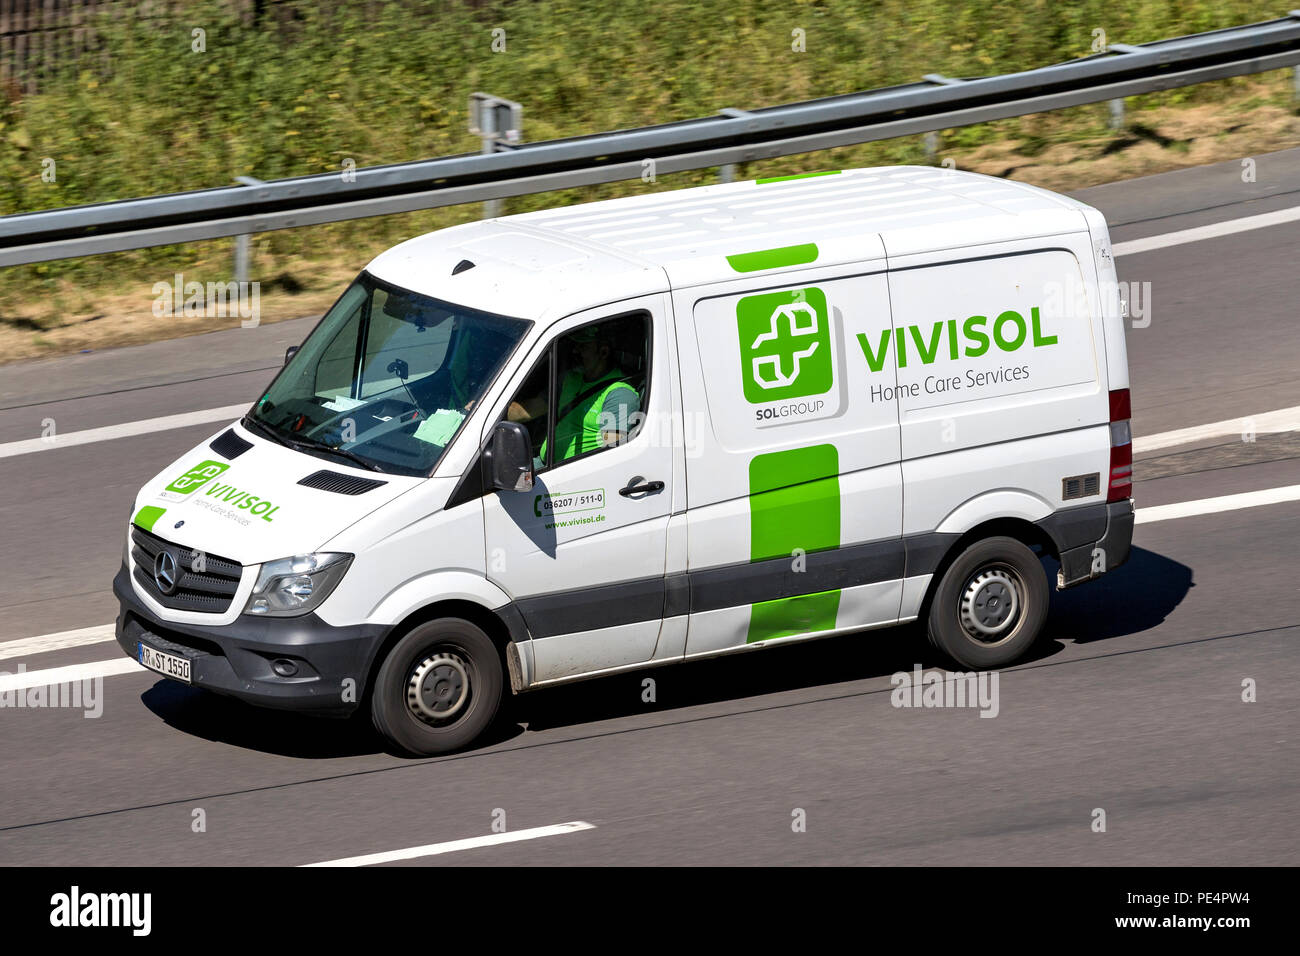 Vivisol van on motorway. Vivisol is one of the premier European groups working in the home care sector Stock Photo